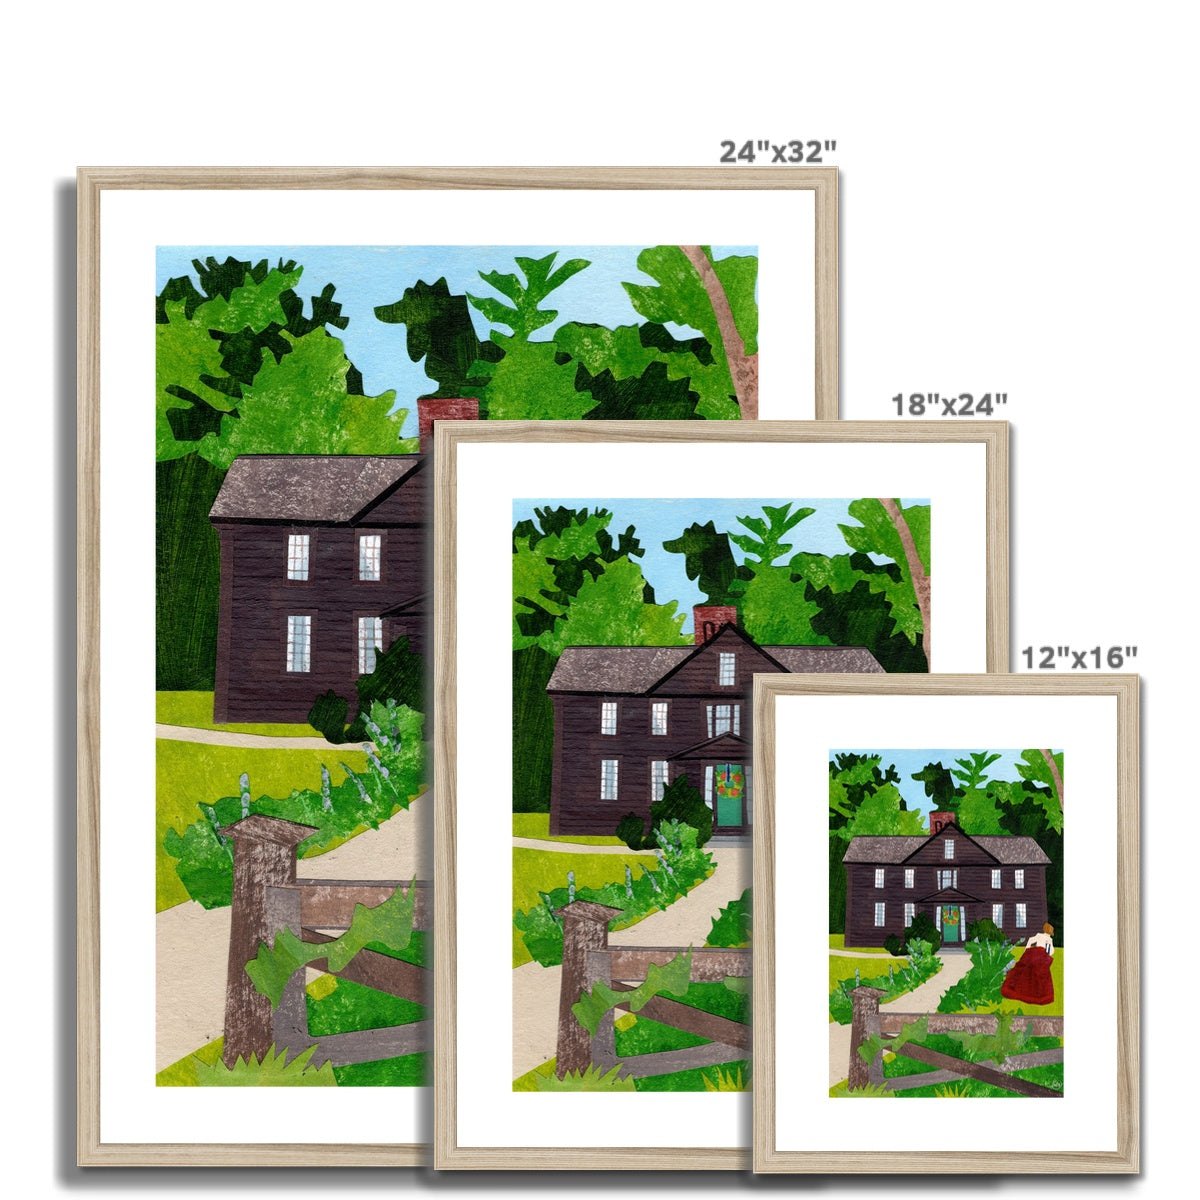 Orchard House Framed & Matted Print